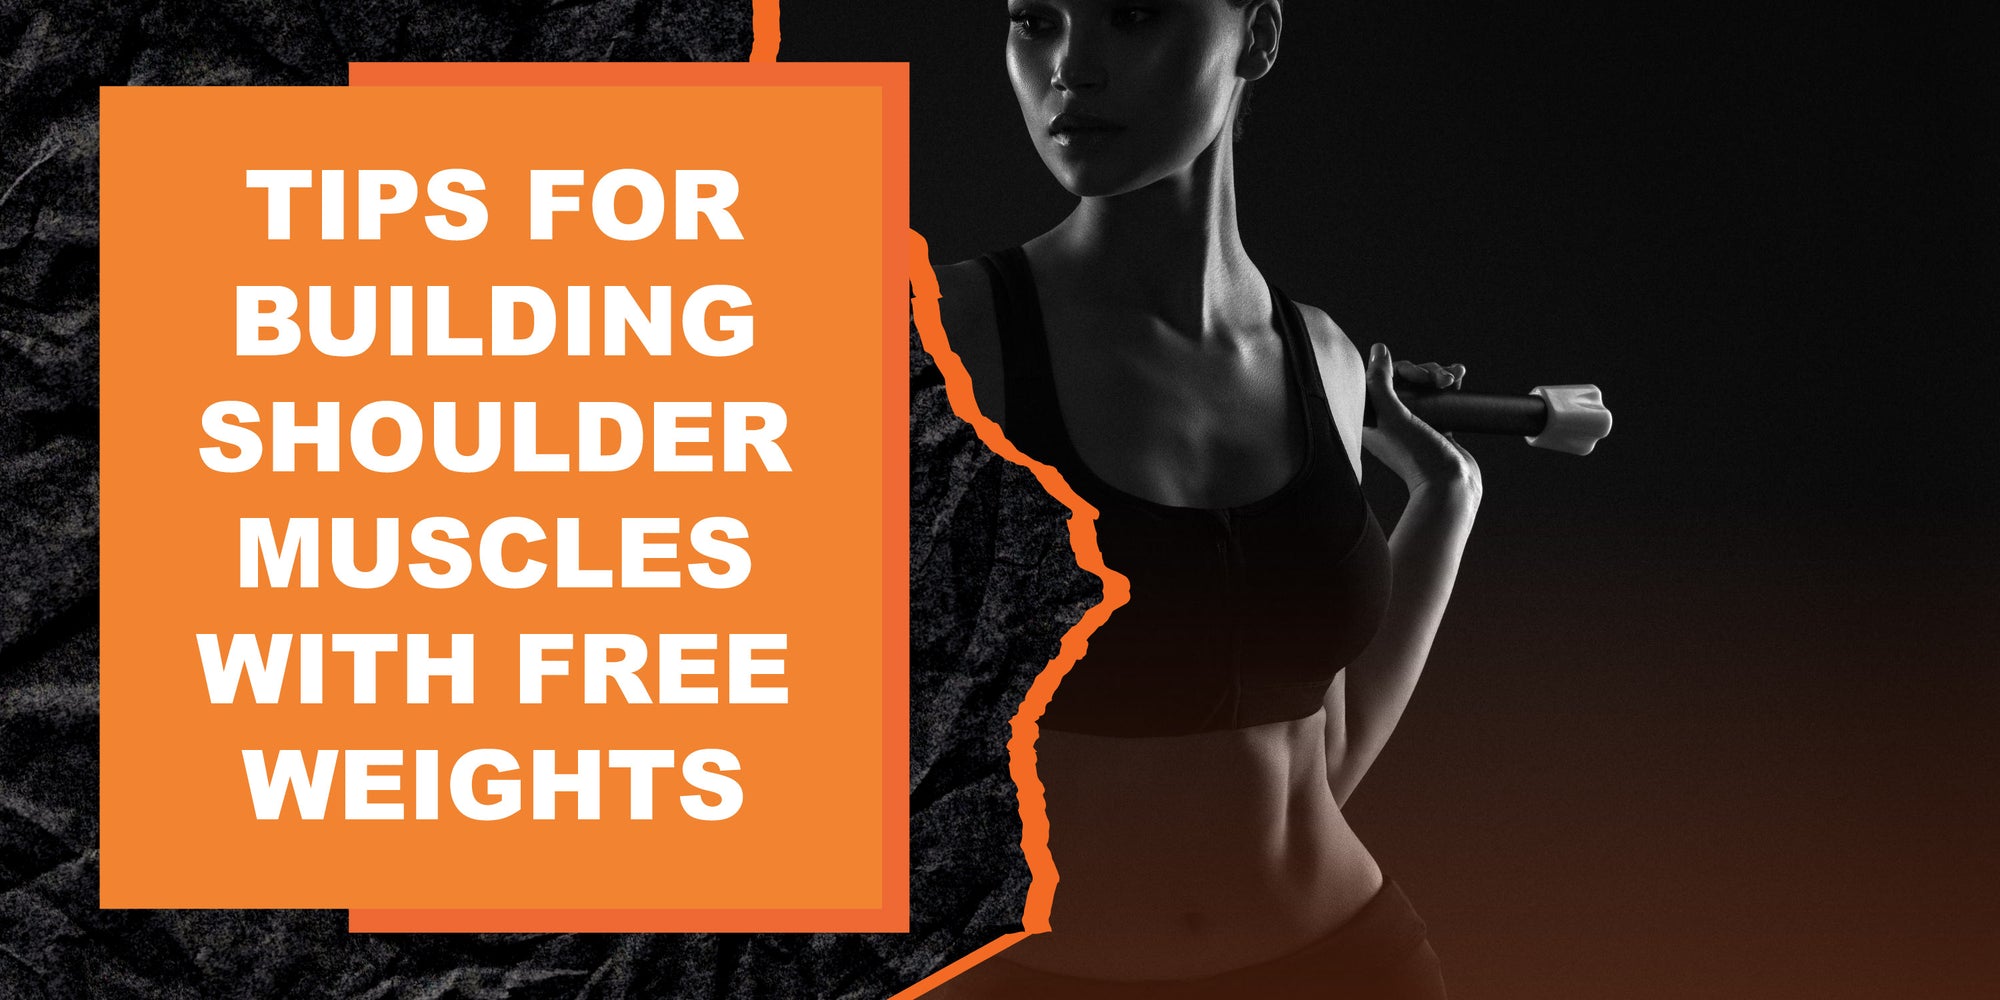 Tips for Building Shoulder Muscles with Free Weights